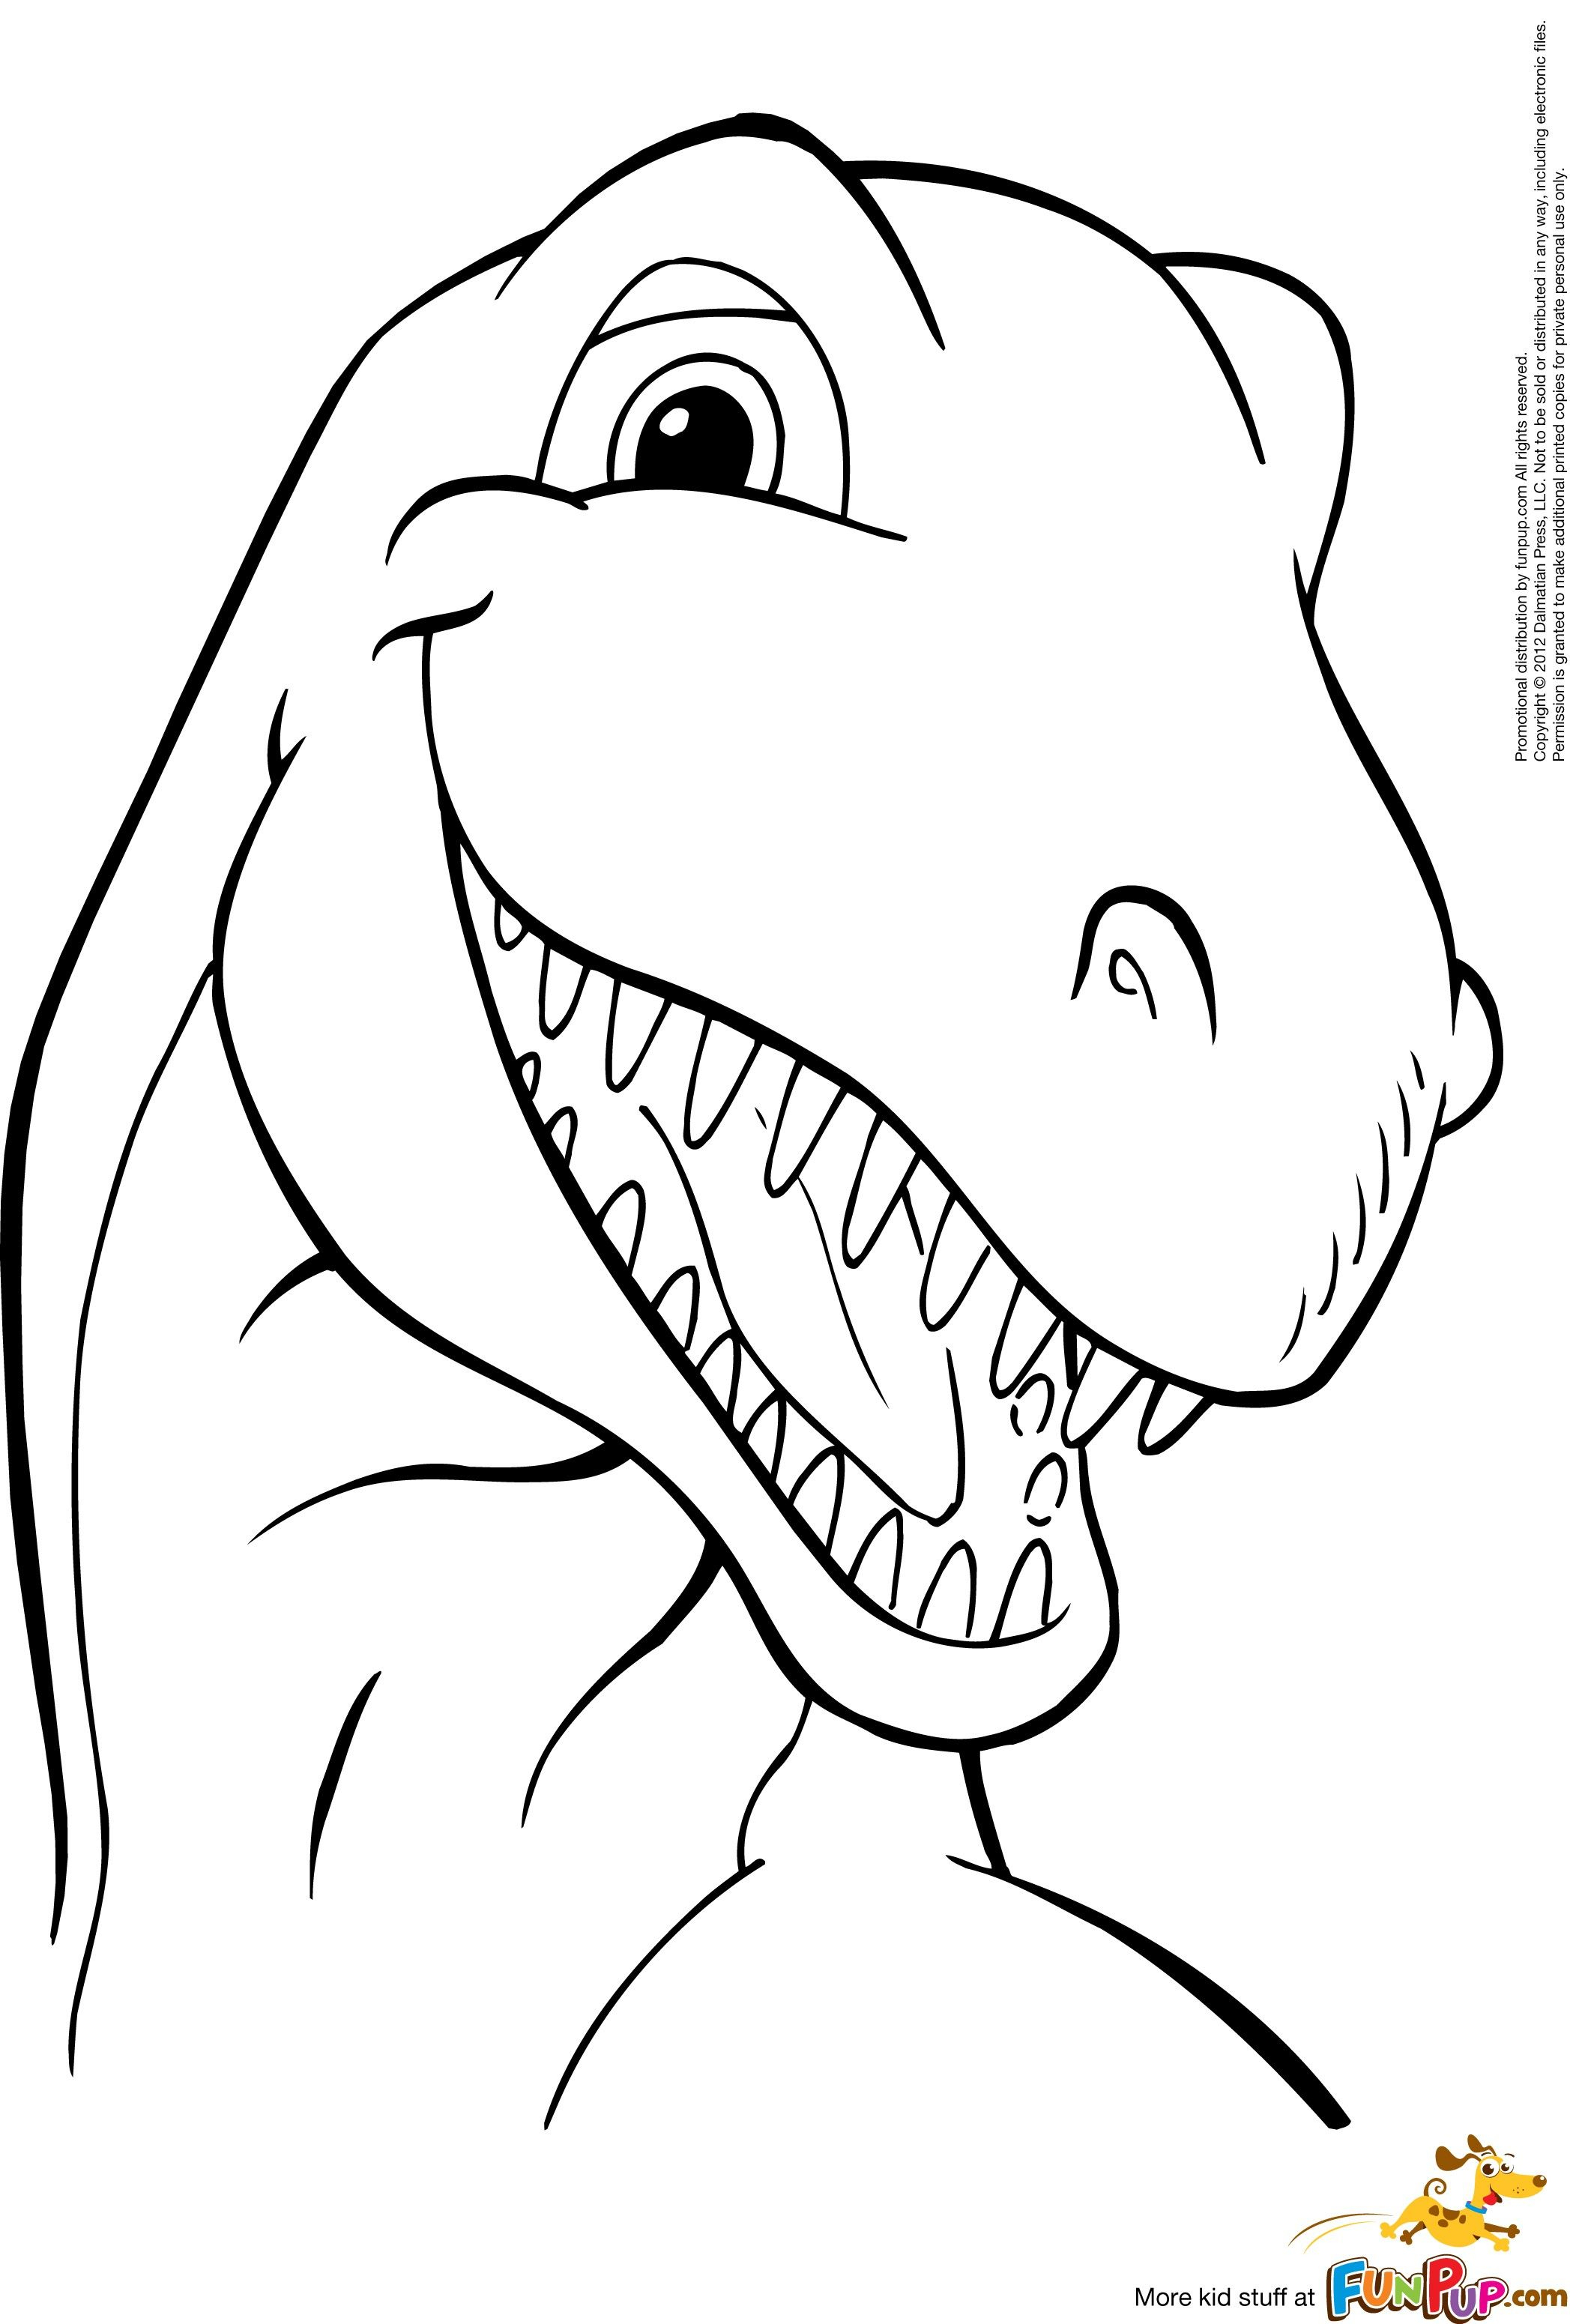 Free Printable Dinosaur Coloring Pages For Kids | Color Pages - Free Printable Dinosaur Coloring Pages